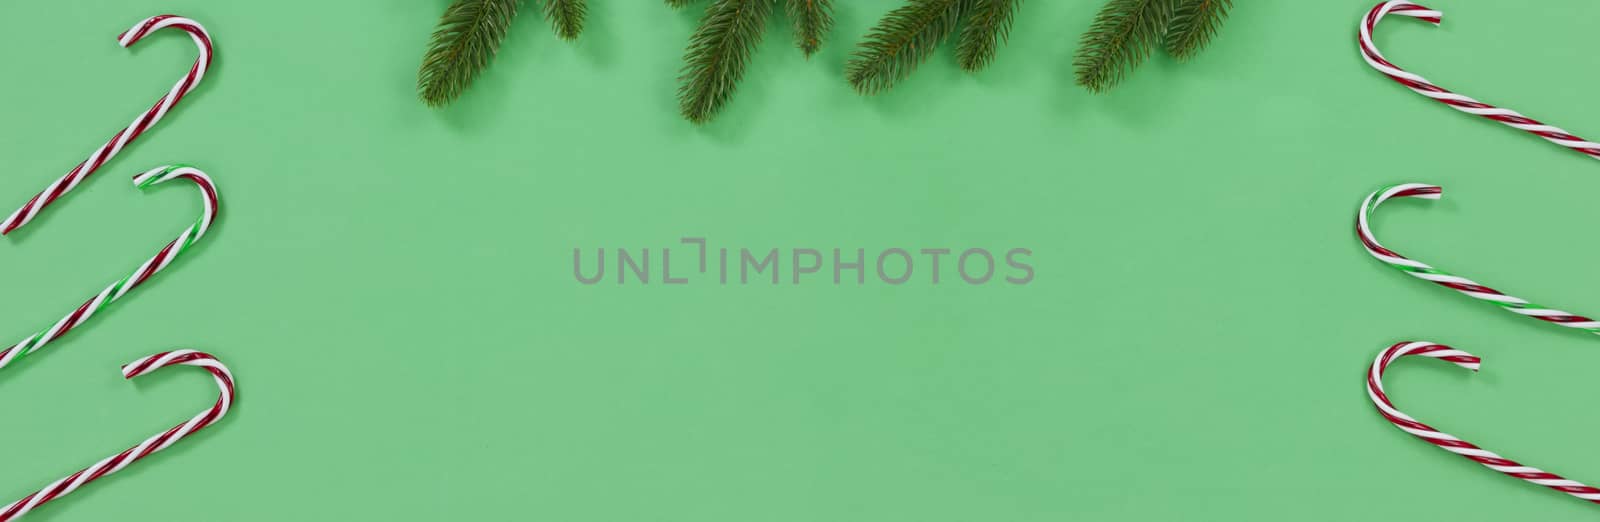 Bright green background with candy canes and fir branches for th by tab1962